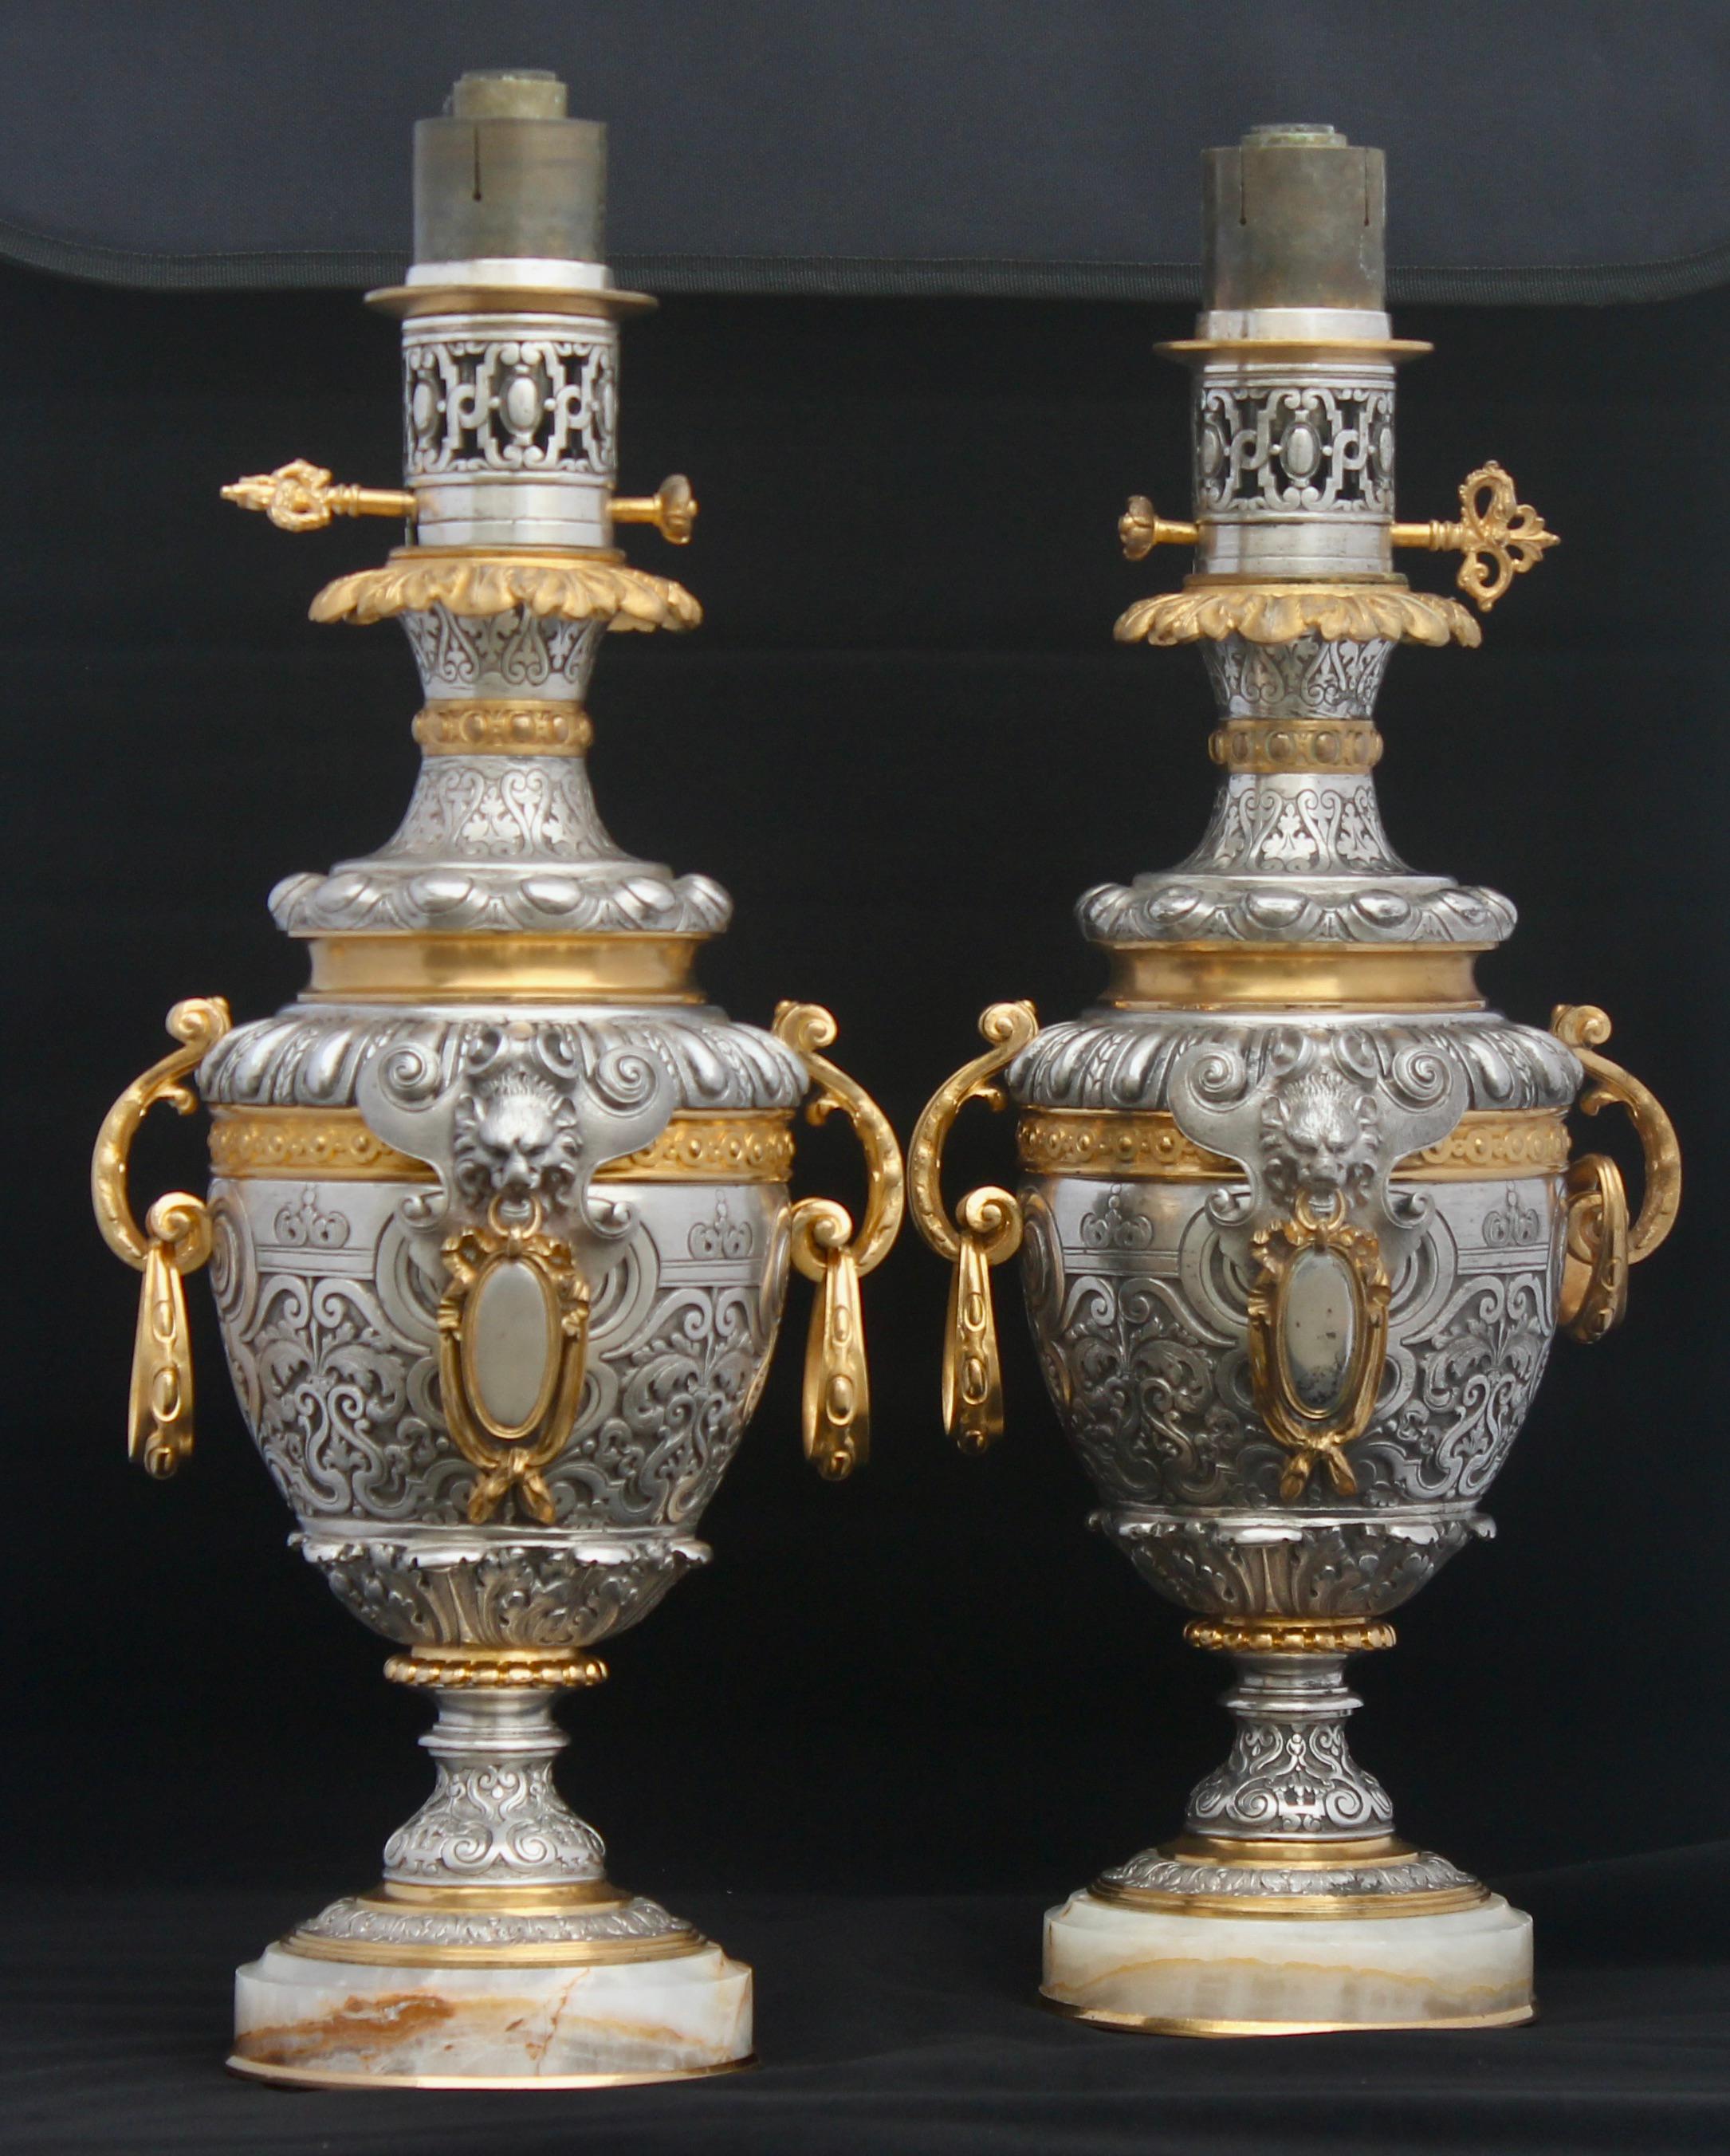 A French Napoléon III ormolu-mounted and silvered bronze pair of lamps 
Very finely chiseled design with Lion's head holding medallions, acanthus leaves, godrons, arabesques and rosaces, with two detached handles,
Resting on onyx bases
Original